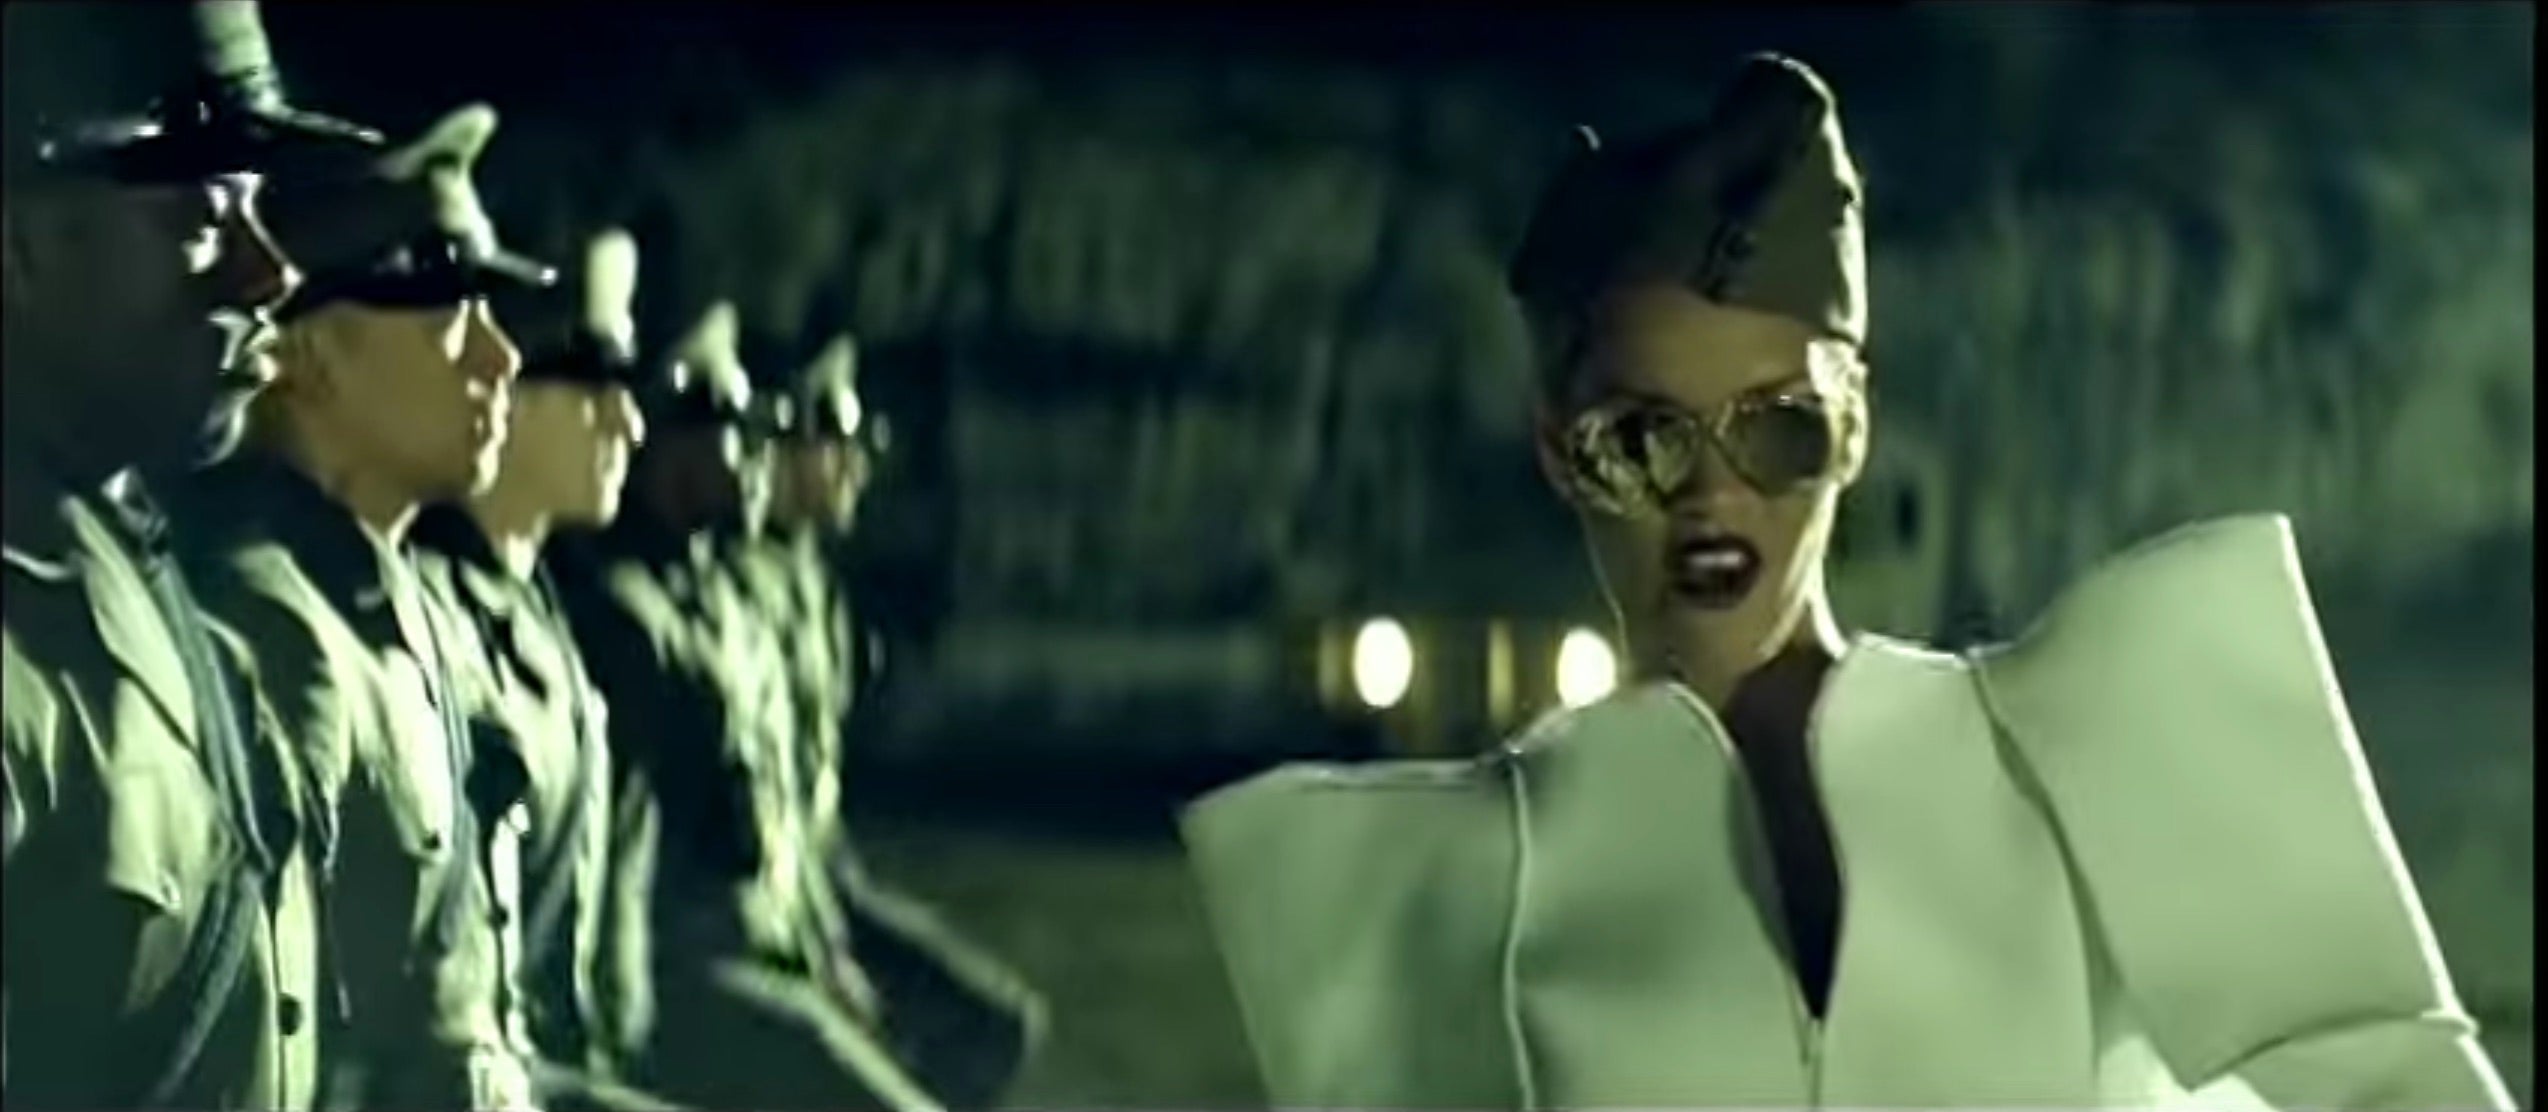 10 Times Rihanna's Music Video Style Made us Want to Play Dress Up
